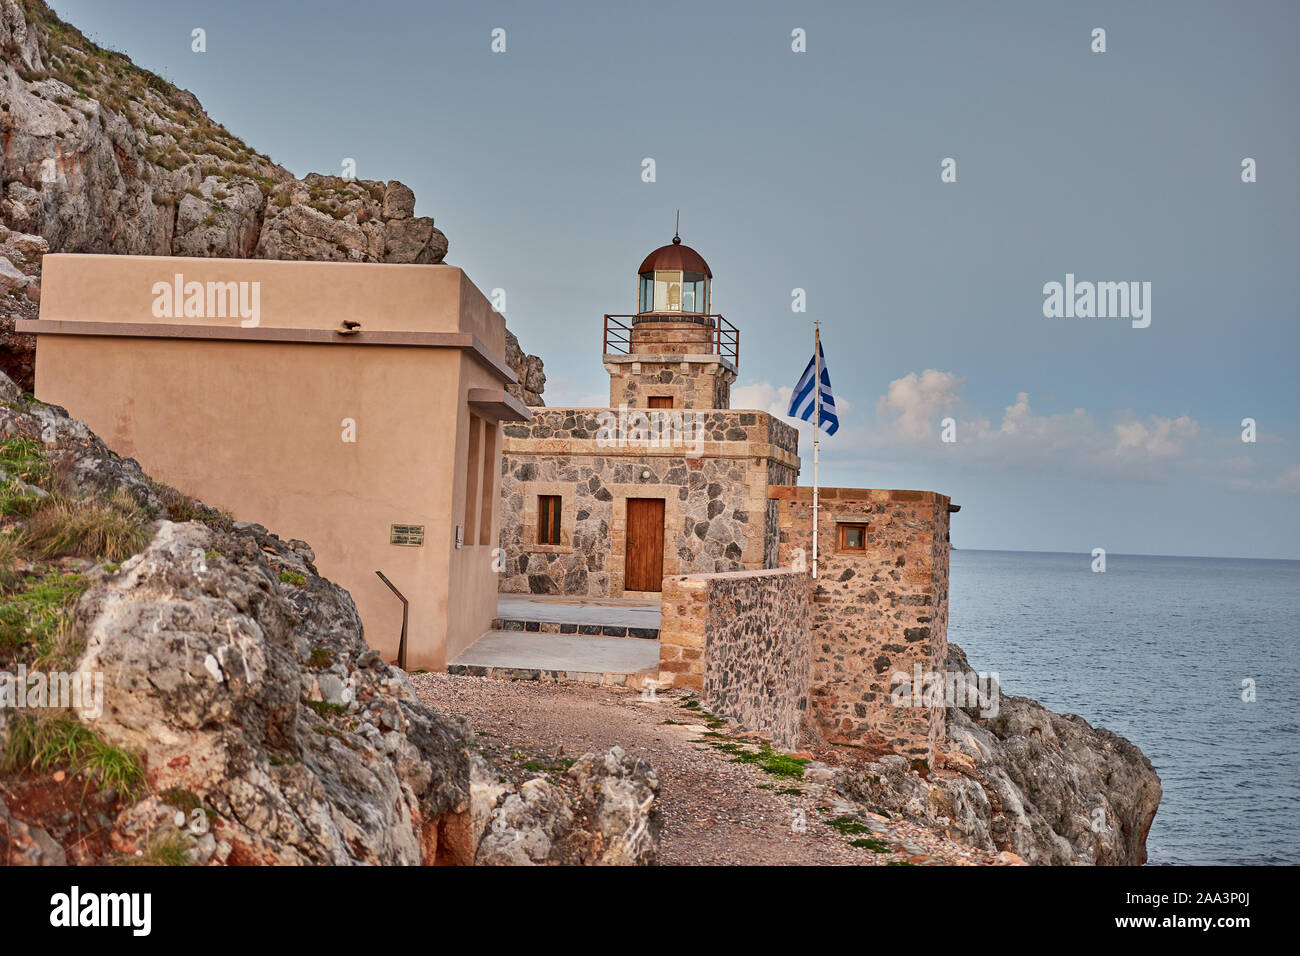 Old Lighthouse into the picturesque castle town of Monemvasia during winter. Architectural stone buildings and beautiful narrow paved streets. Stock Photo